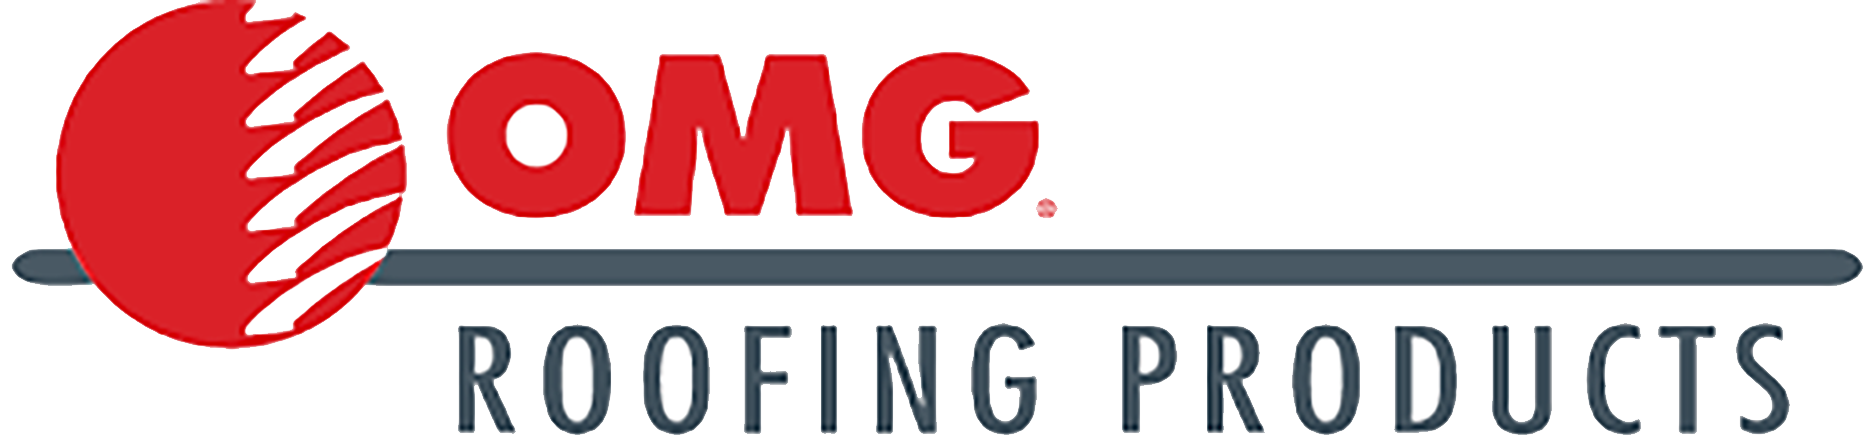 OMG Roofing Products Logo